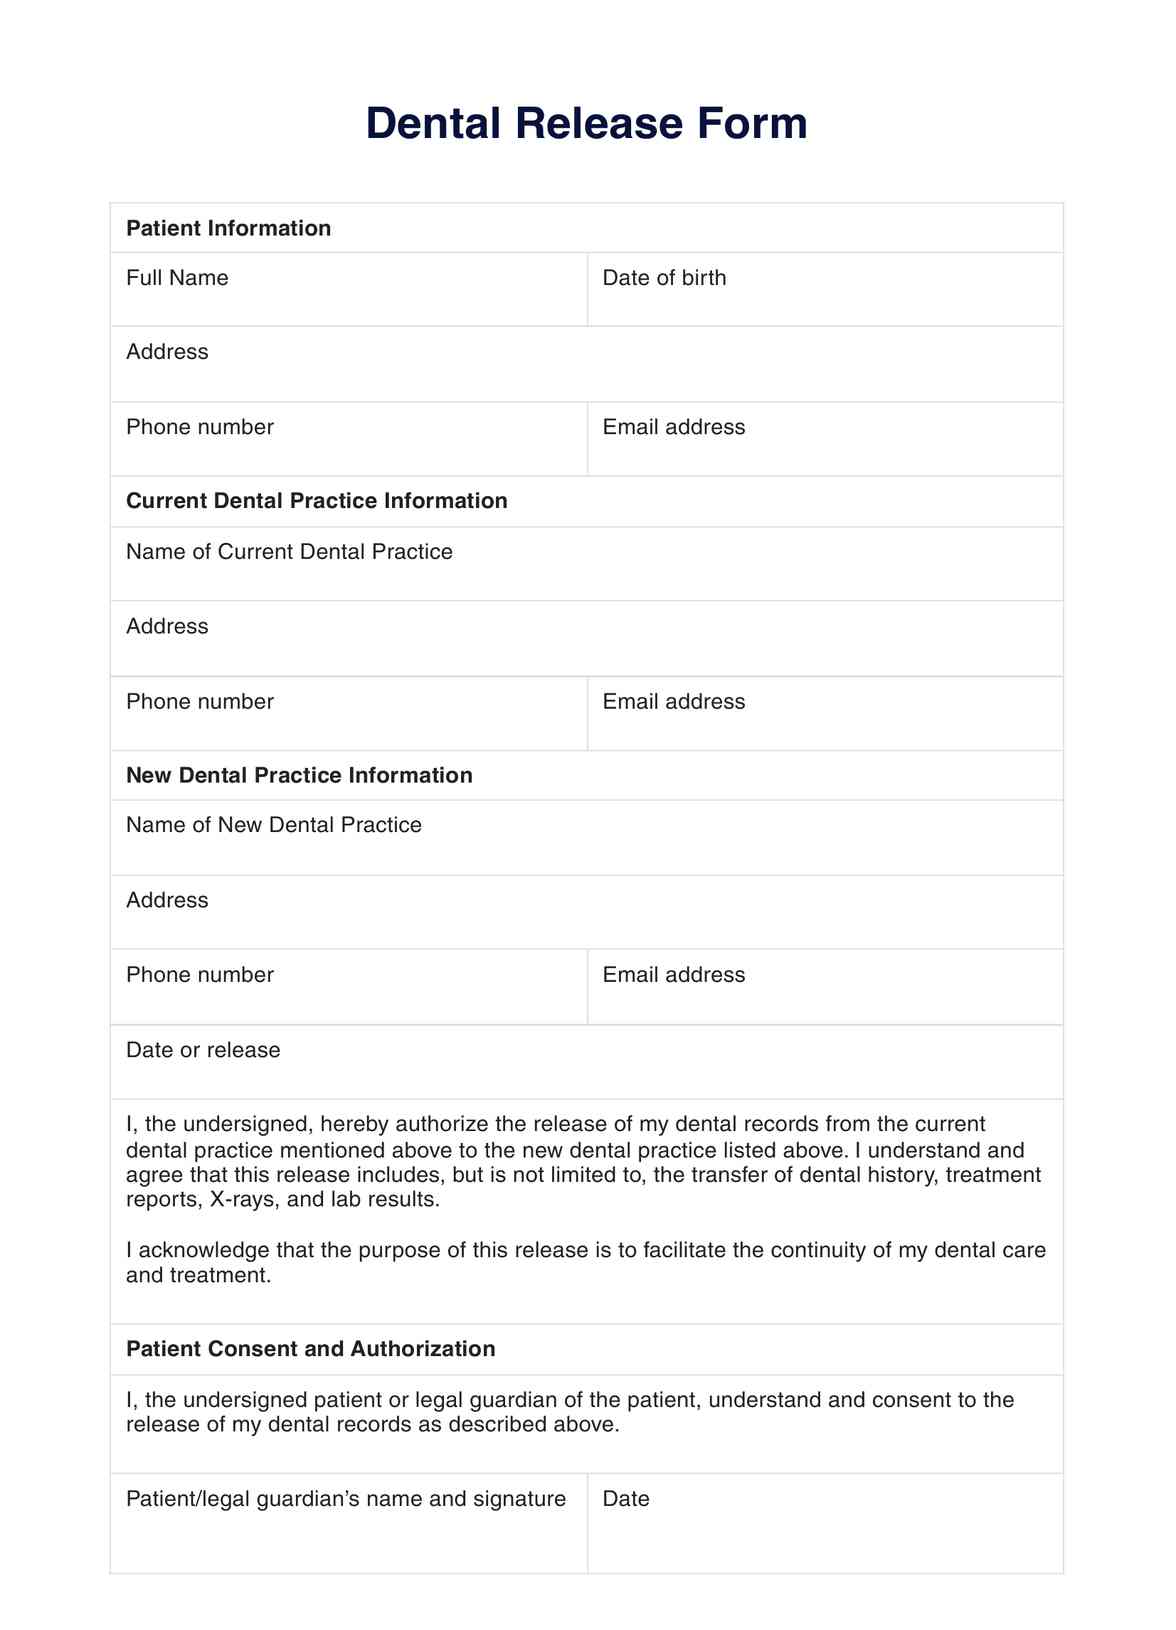 Dental Records Release Form PDF Example